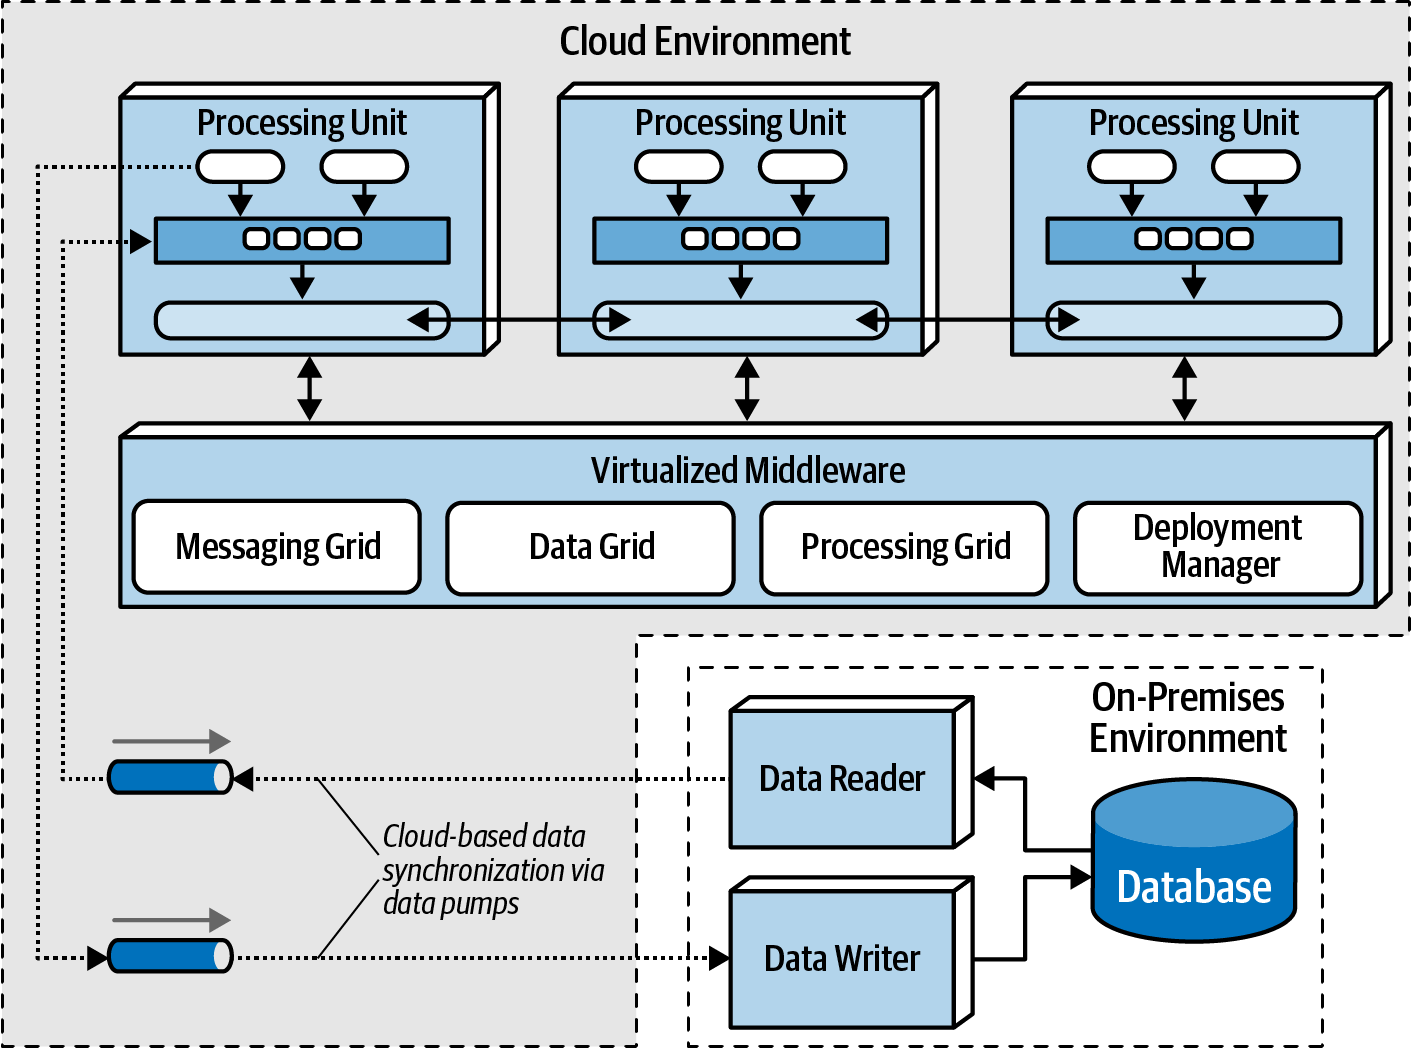 Hybrid cloud-based and on-prem topology from Fundamentals of Software Architecture.